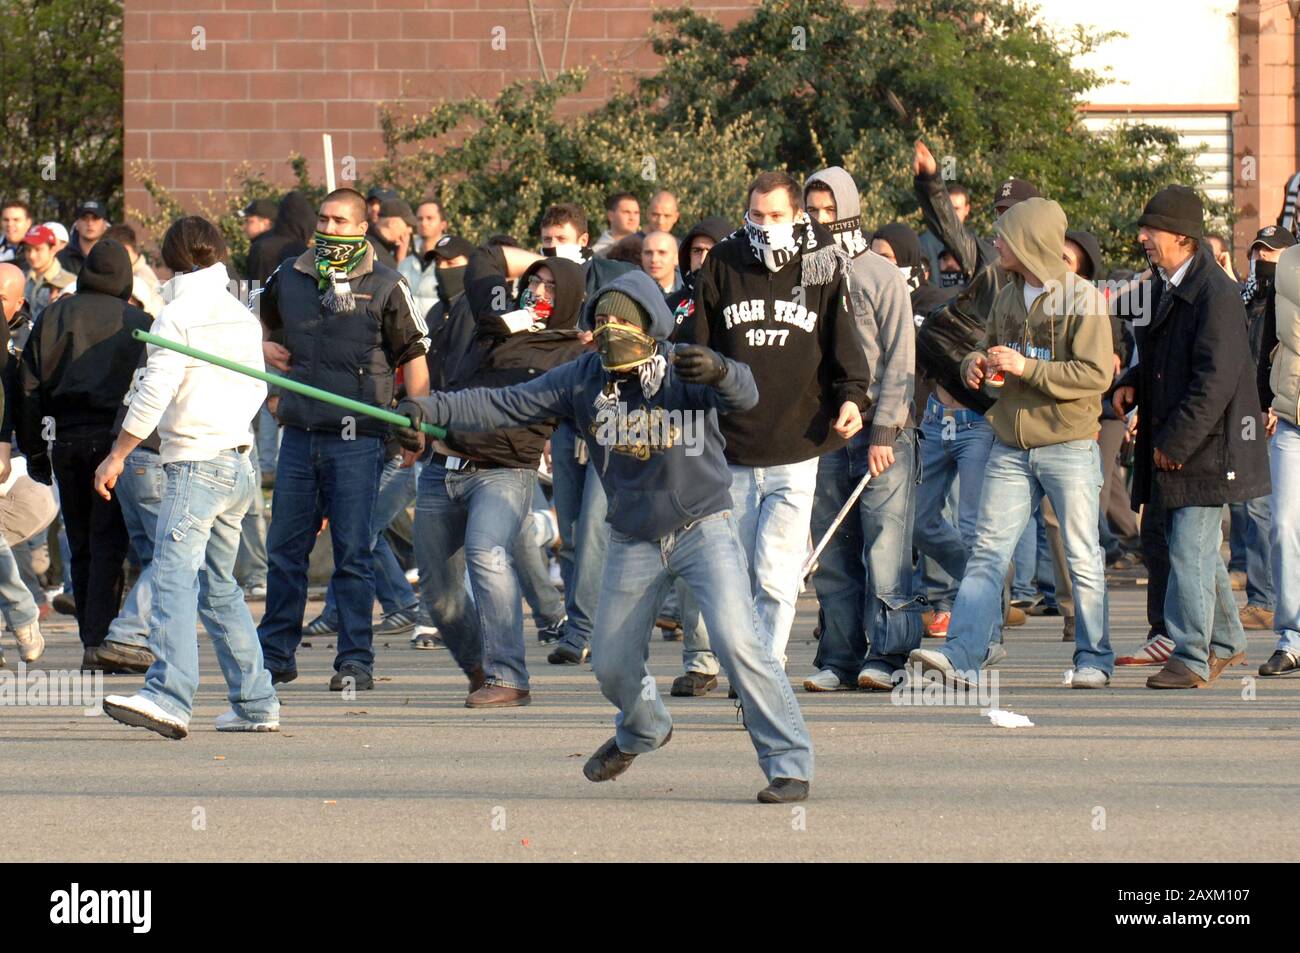 Juventus Football fans clash with Liverpool fans and police when the two teams met in Turin in 2005. It was the first clash since the Heysel stadium disaster in 1985 when 39 people lost their lives. Stock Photo